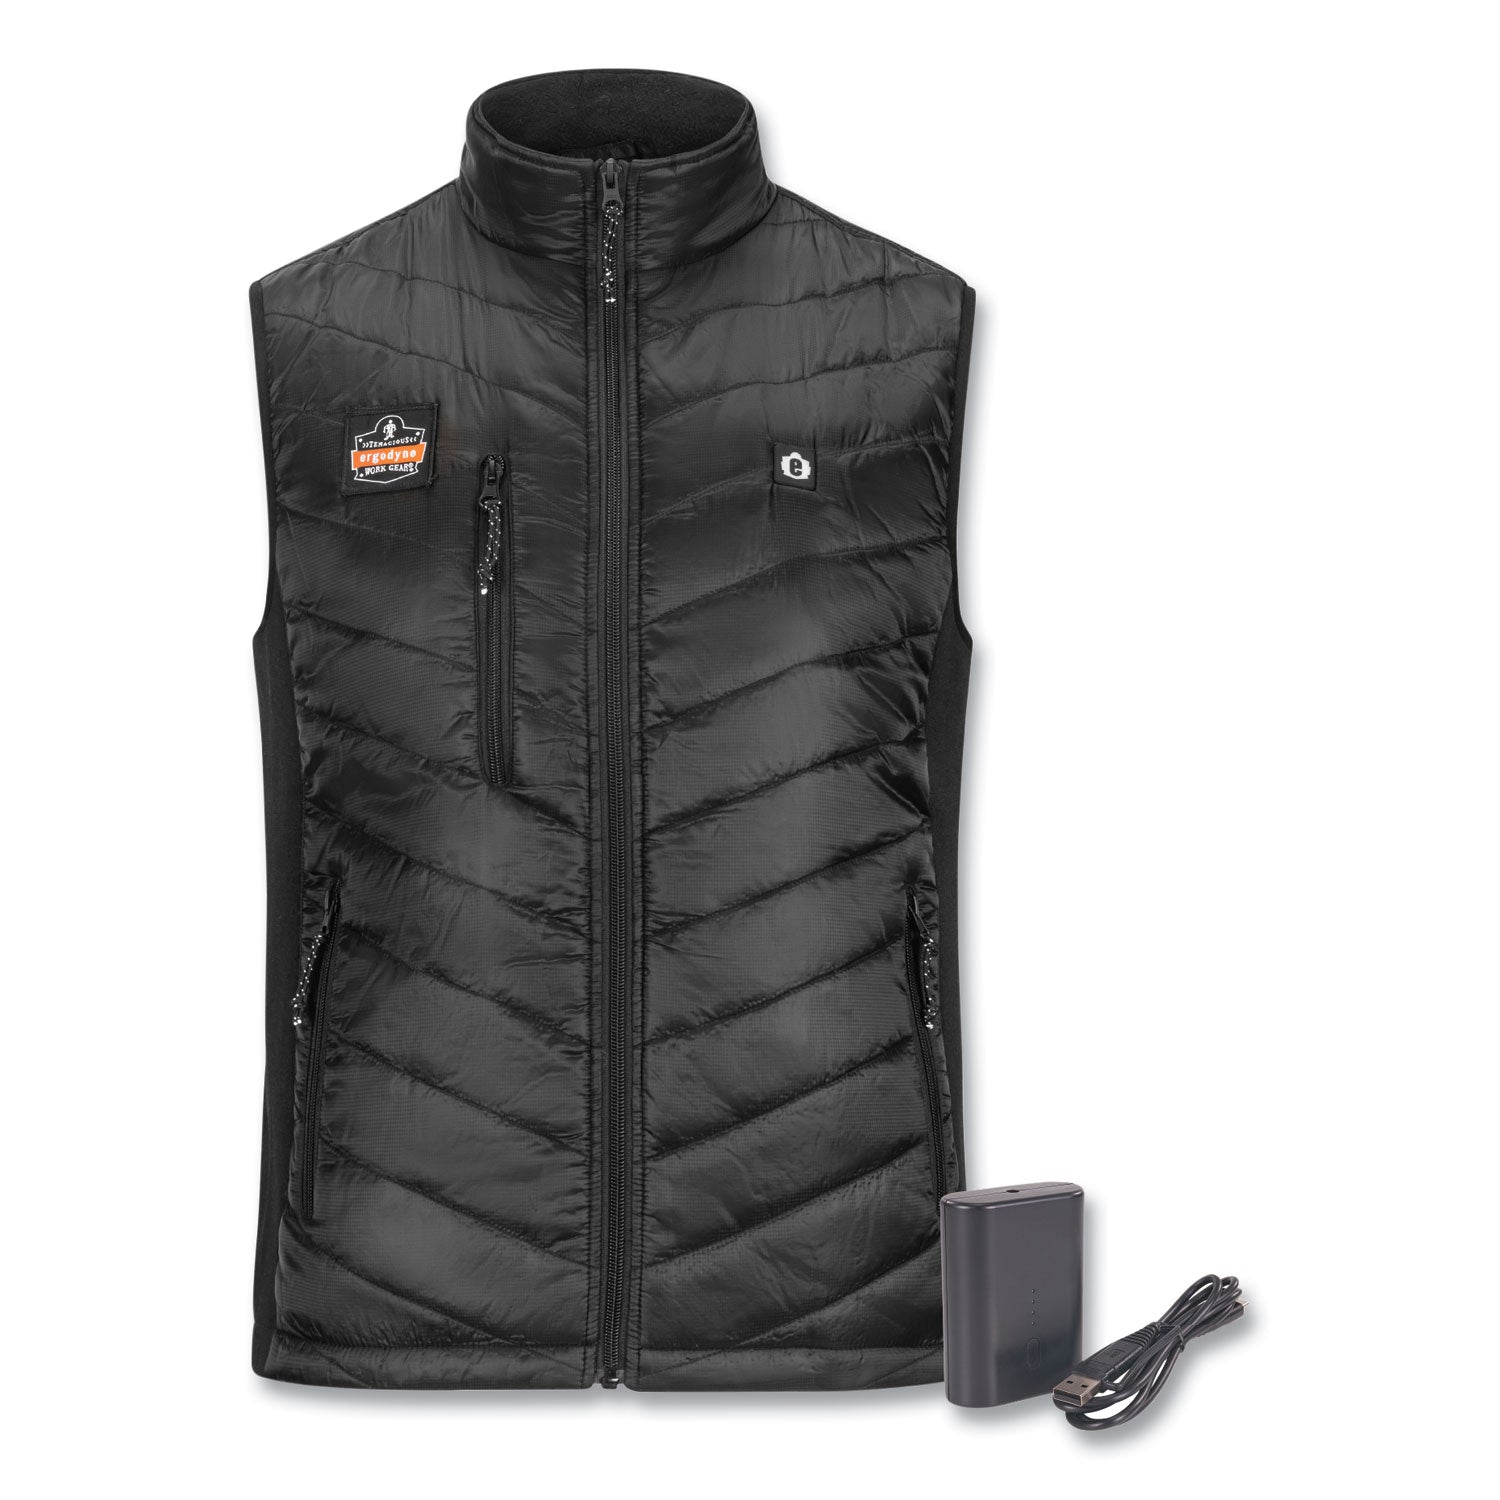 n-ferno-6495-rechargeable-heated-vest-with-batter-power-bank-fleece-polyester-small-black-ships-in-1-3-business-days_ego41701 - 1